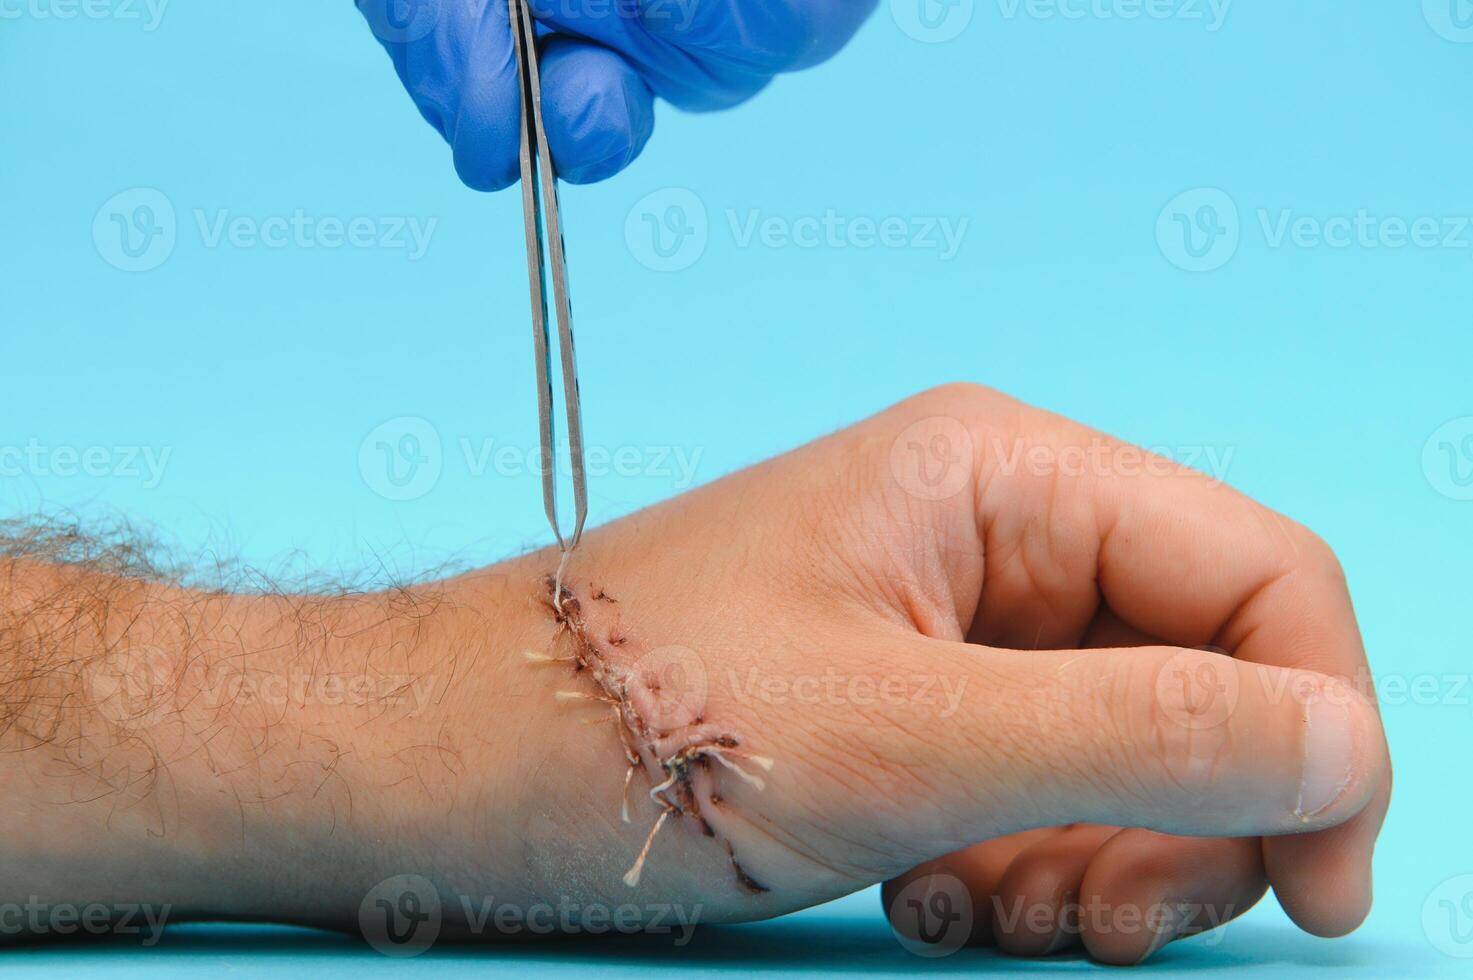 Suture wound on hand,Pain of accident concept photo